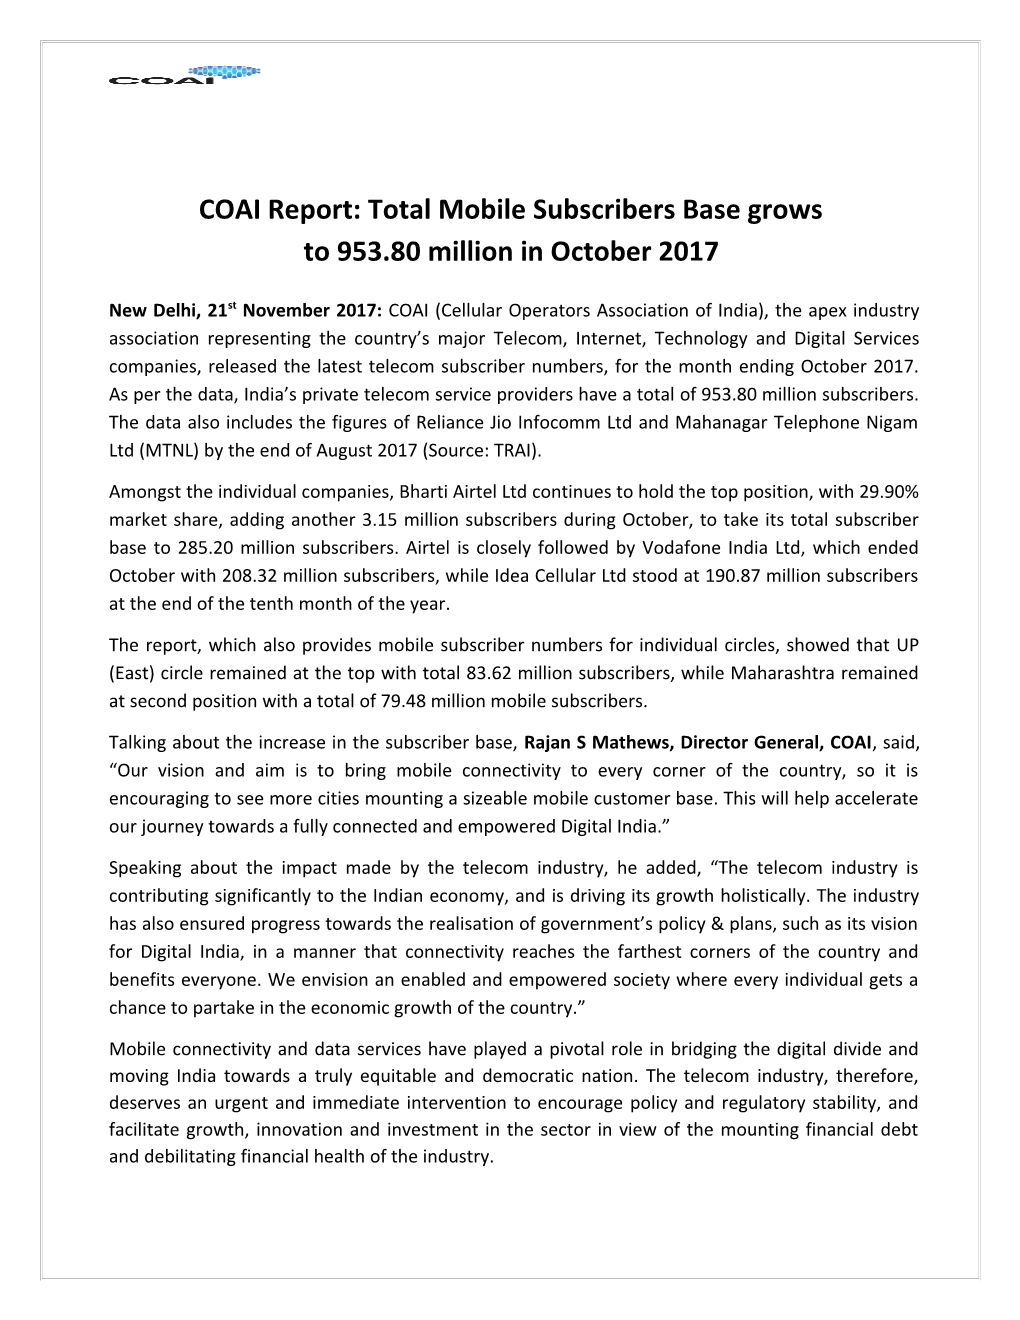 COAI Report: Total Mobile Subscribers Base Grows to 953.80 Million in October 2017